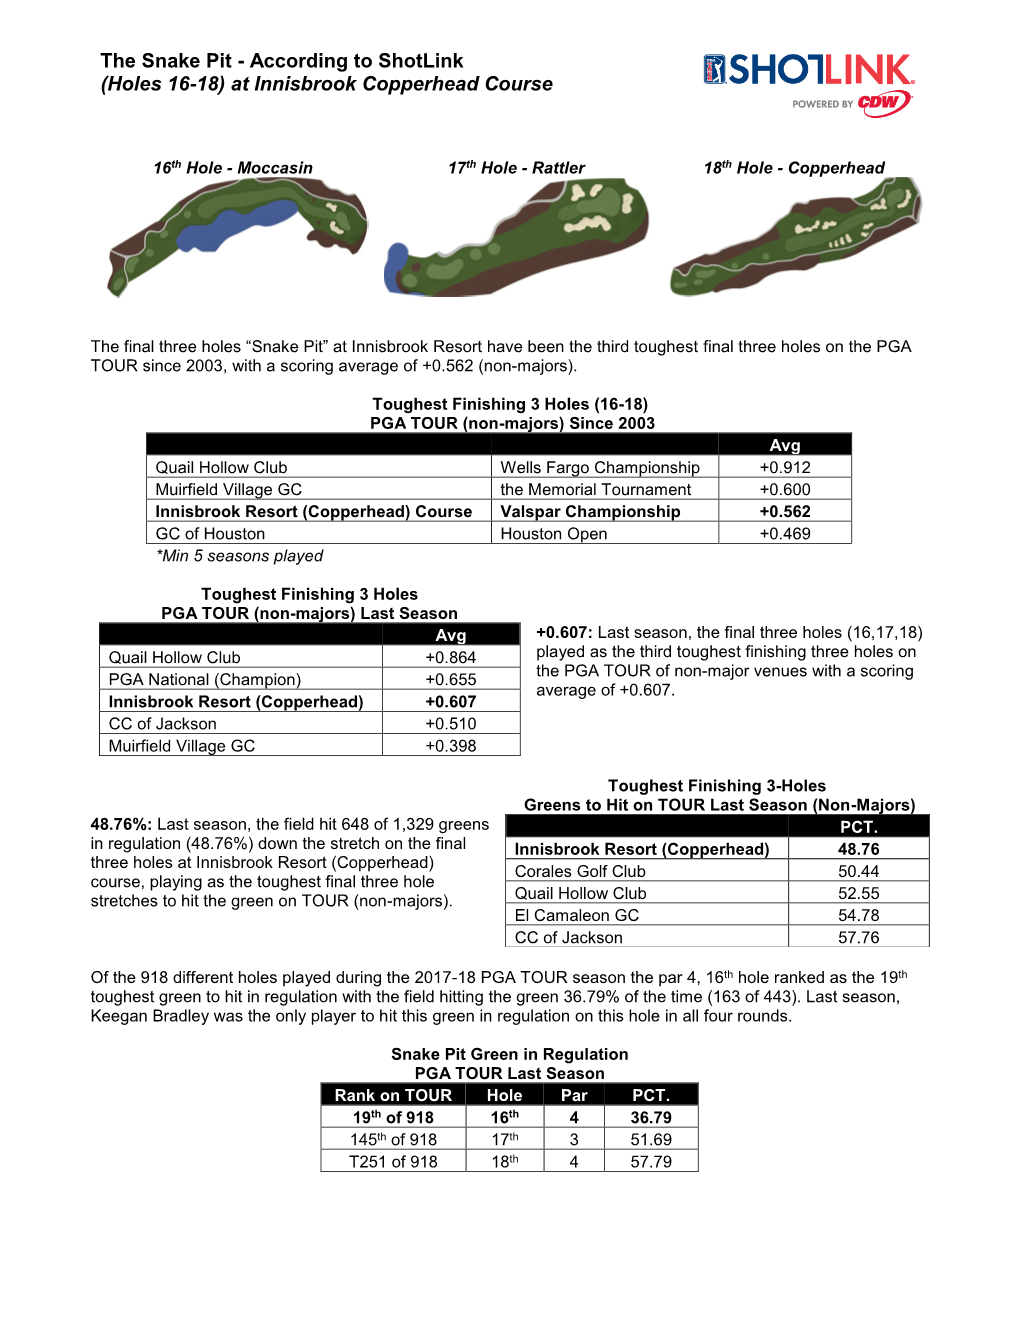 The Snake Pit - According to Shotlink (Holes 16-18) at Innisbrook Copperhead Course